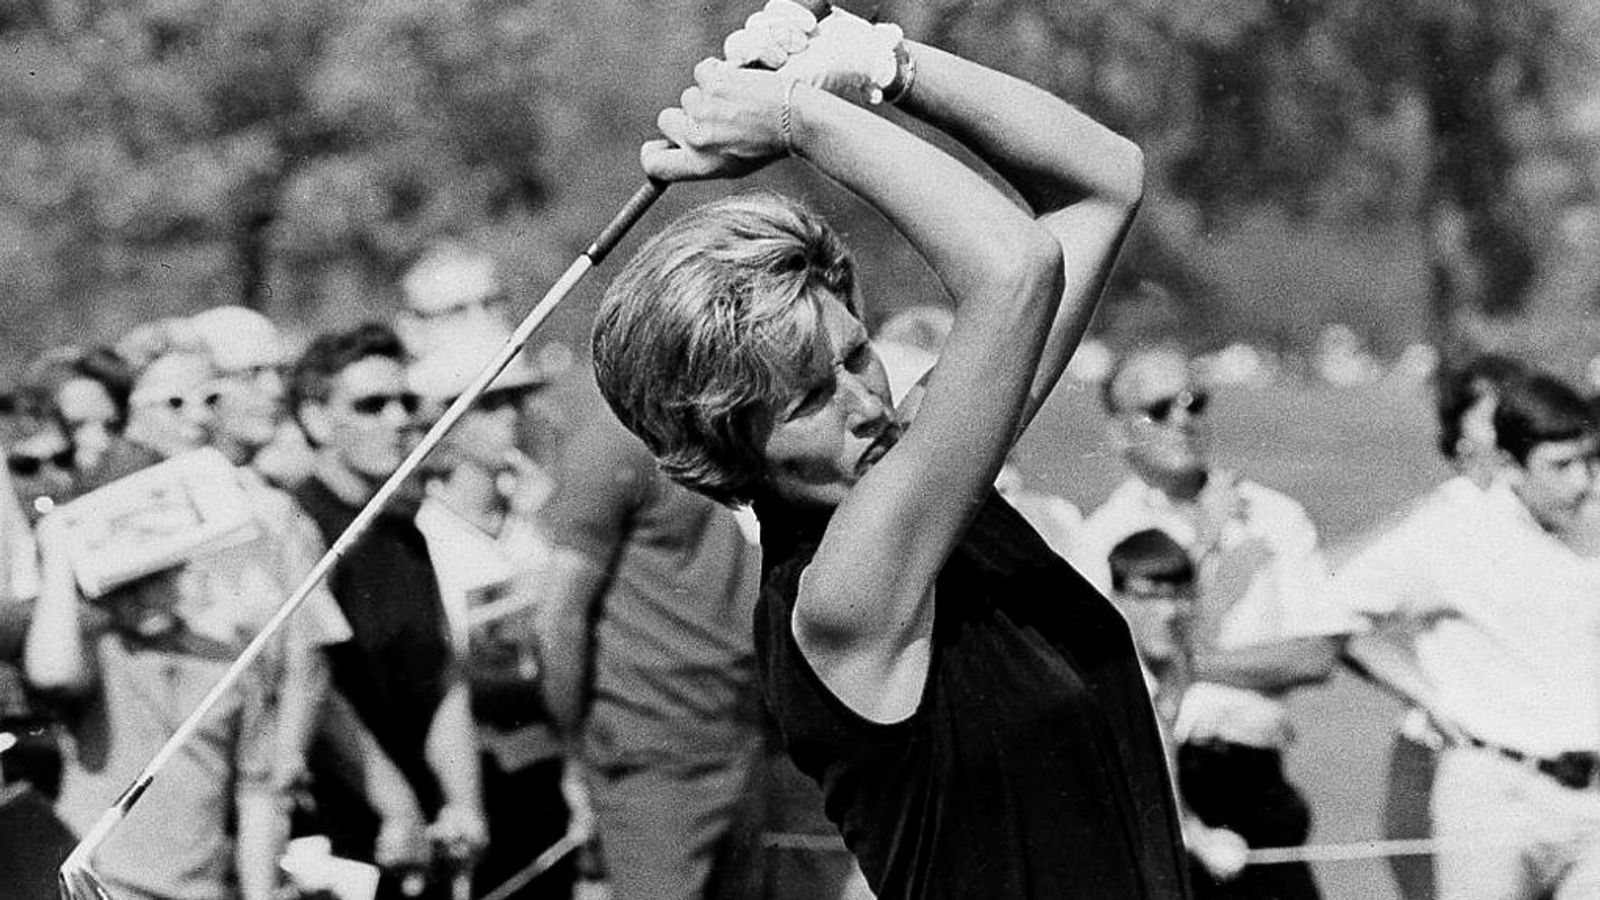 Golfer Kathy Whitworth, who clocked most professional tour victories of all time, dies aged 83